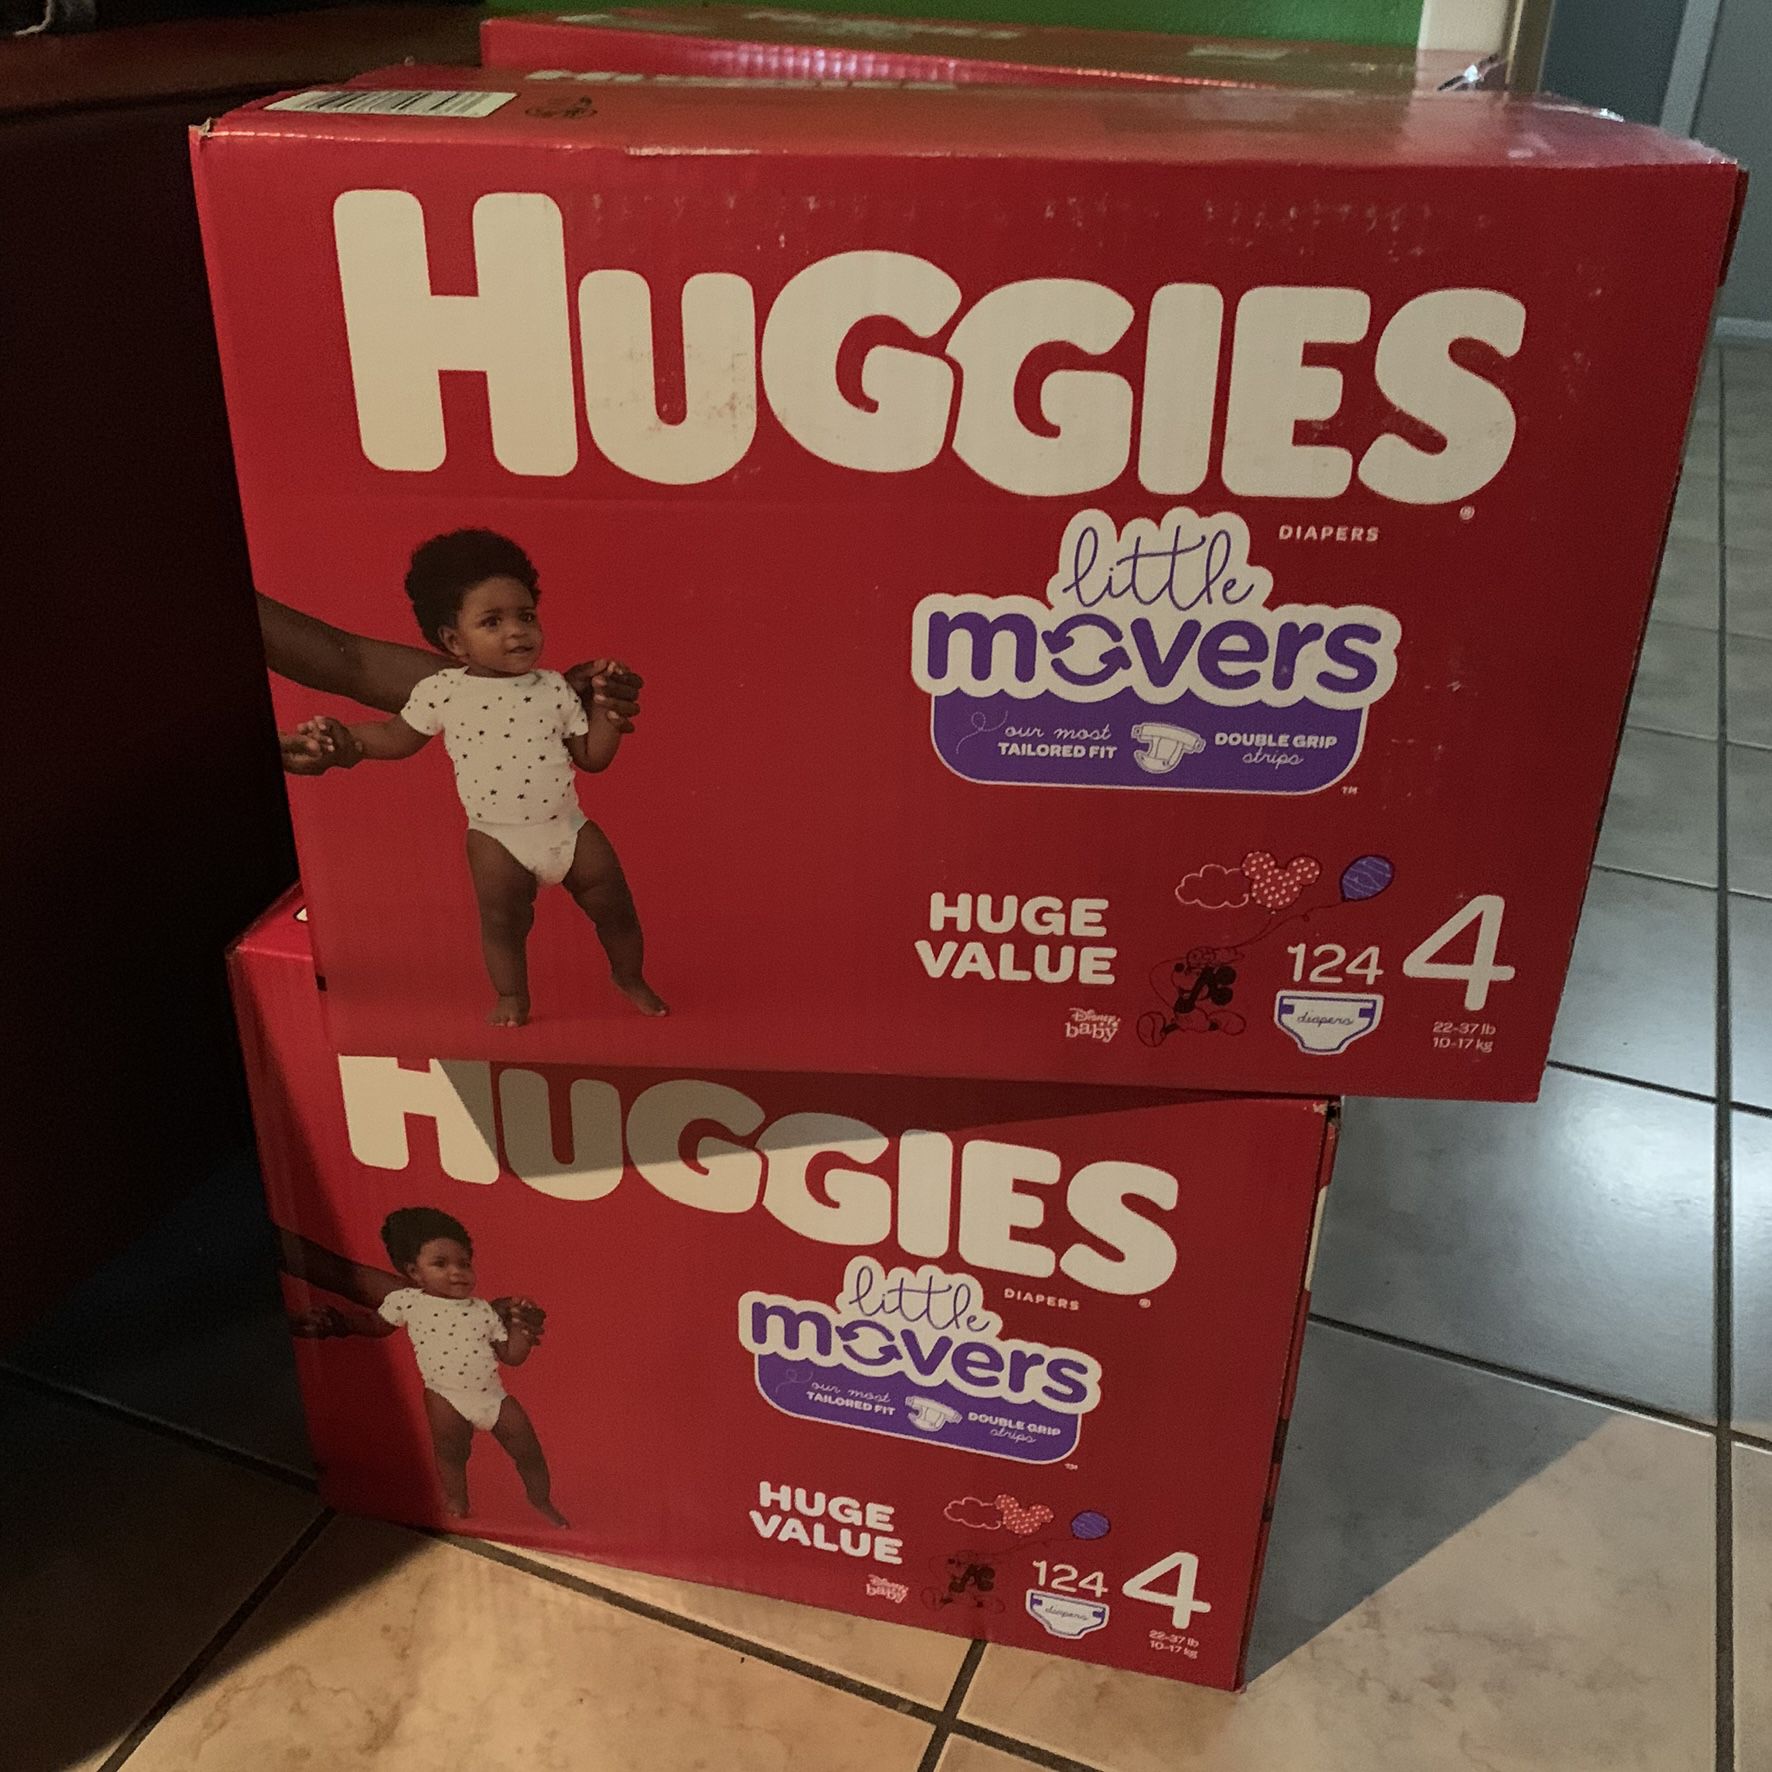 Huggies Little Movers diapers - size 4 - 124 ct box